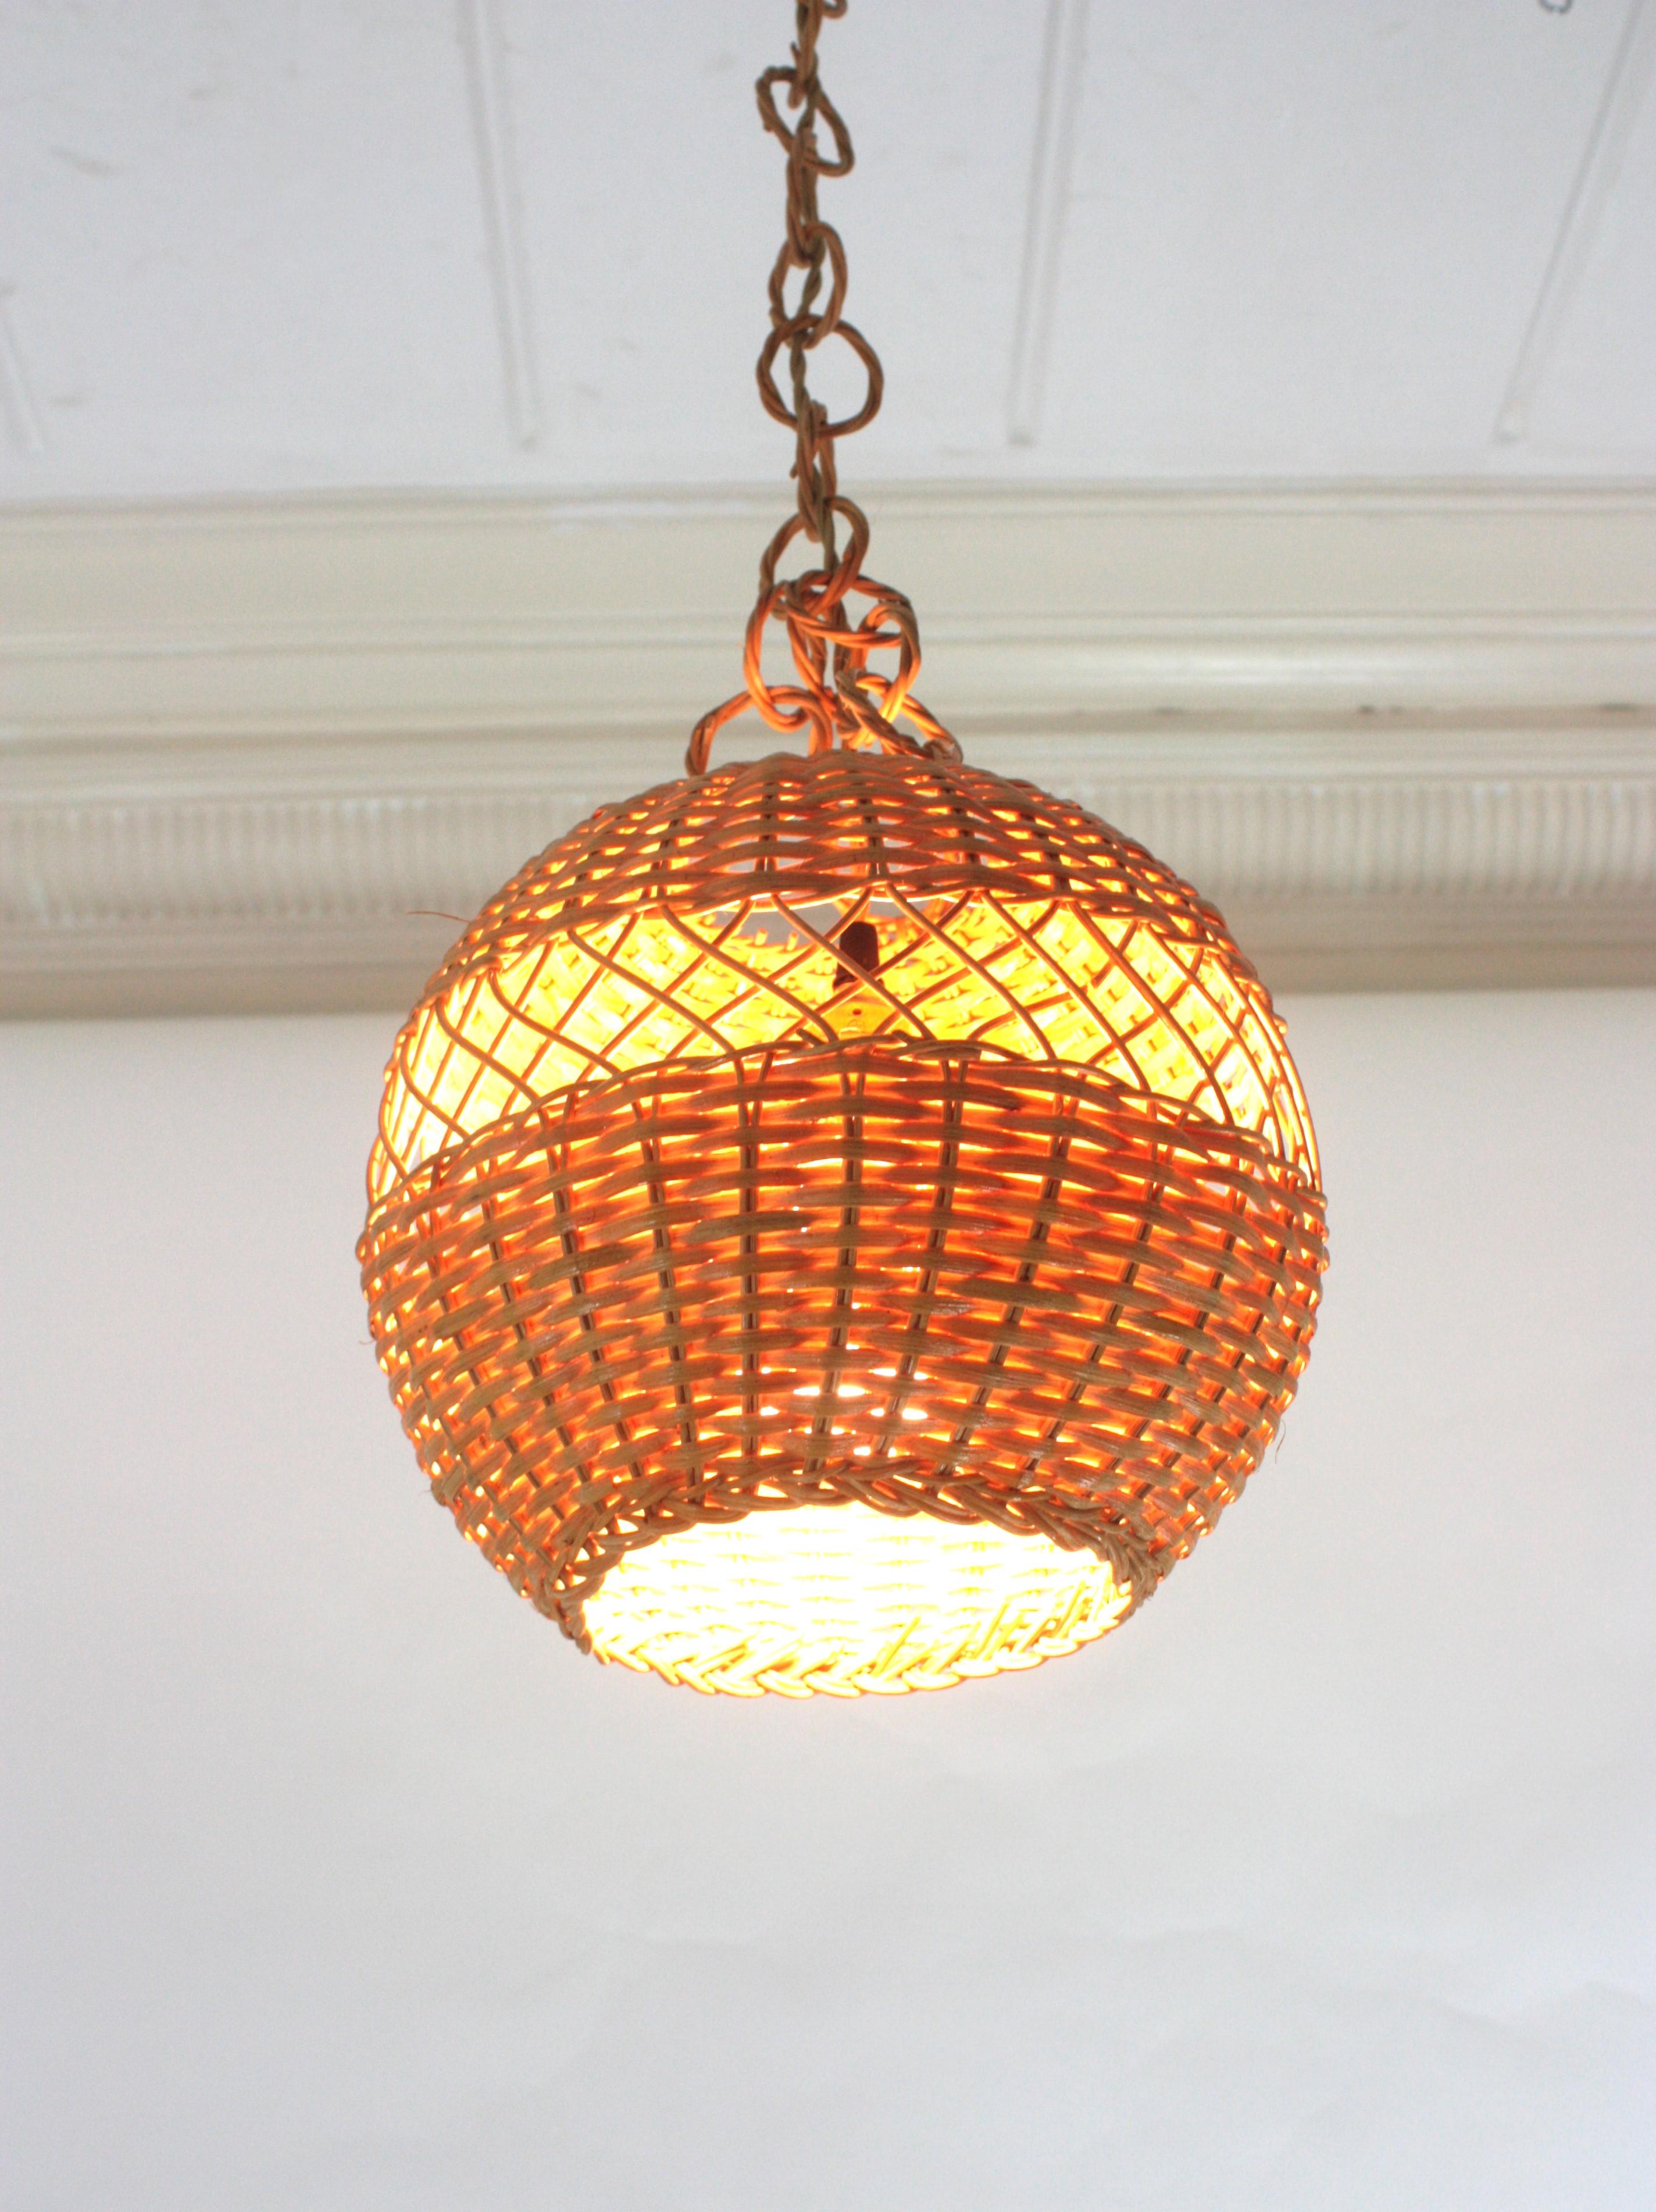 Pair of Handwoven Wicker Globe Pendant Lights or Lanterns For Sale 7